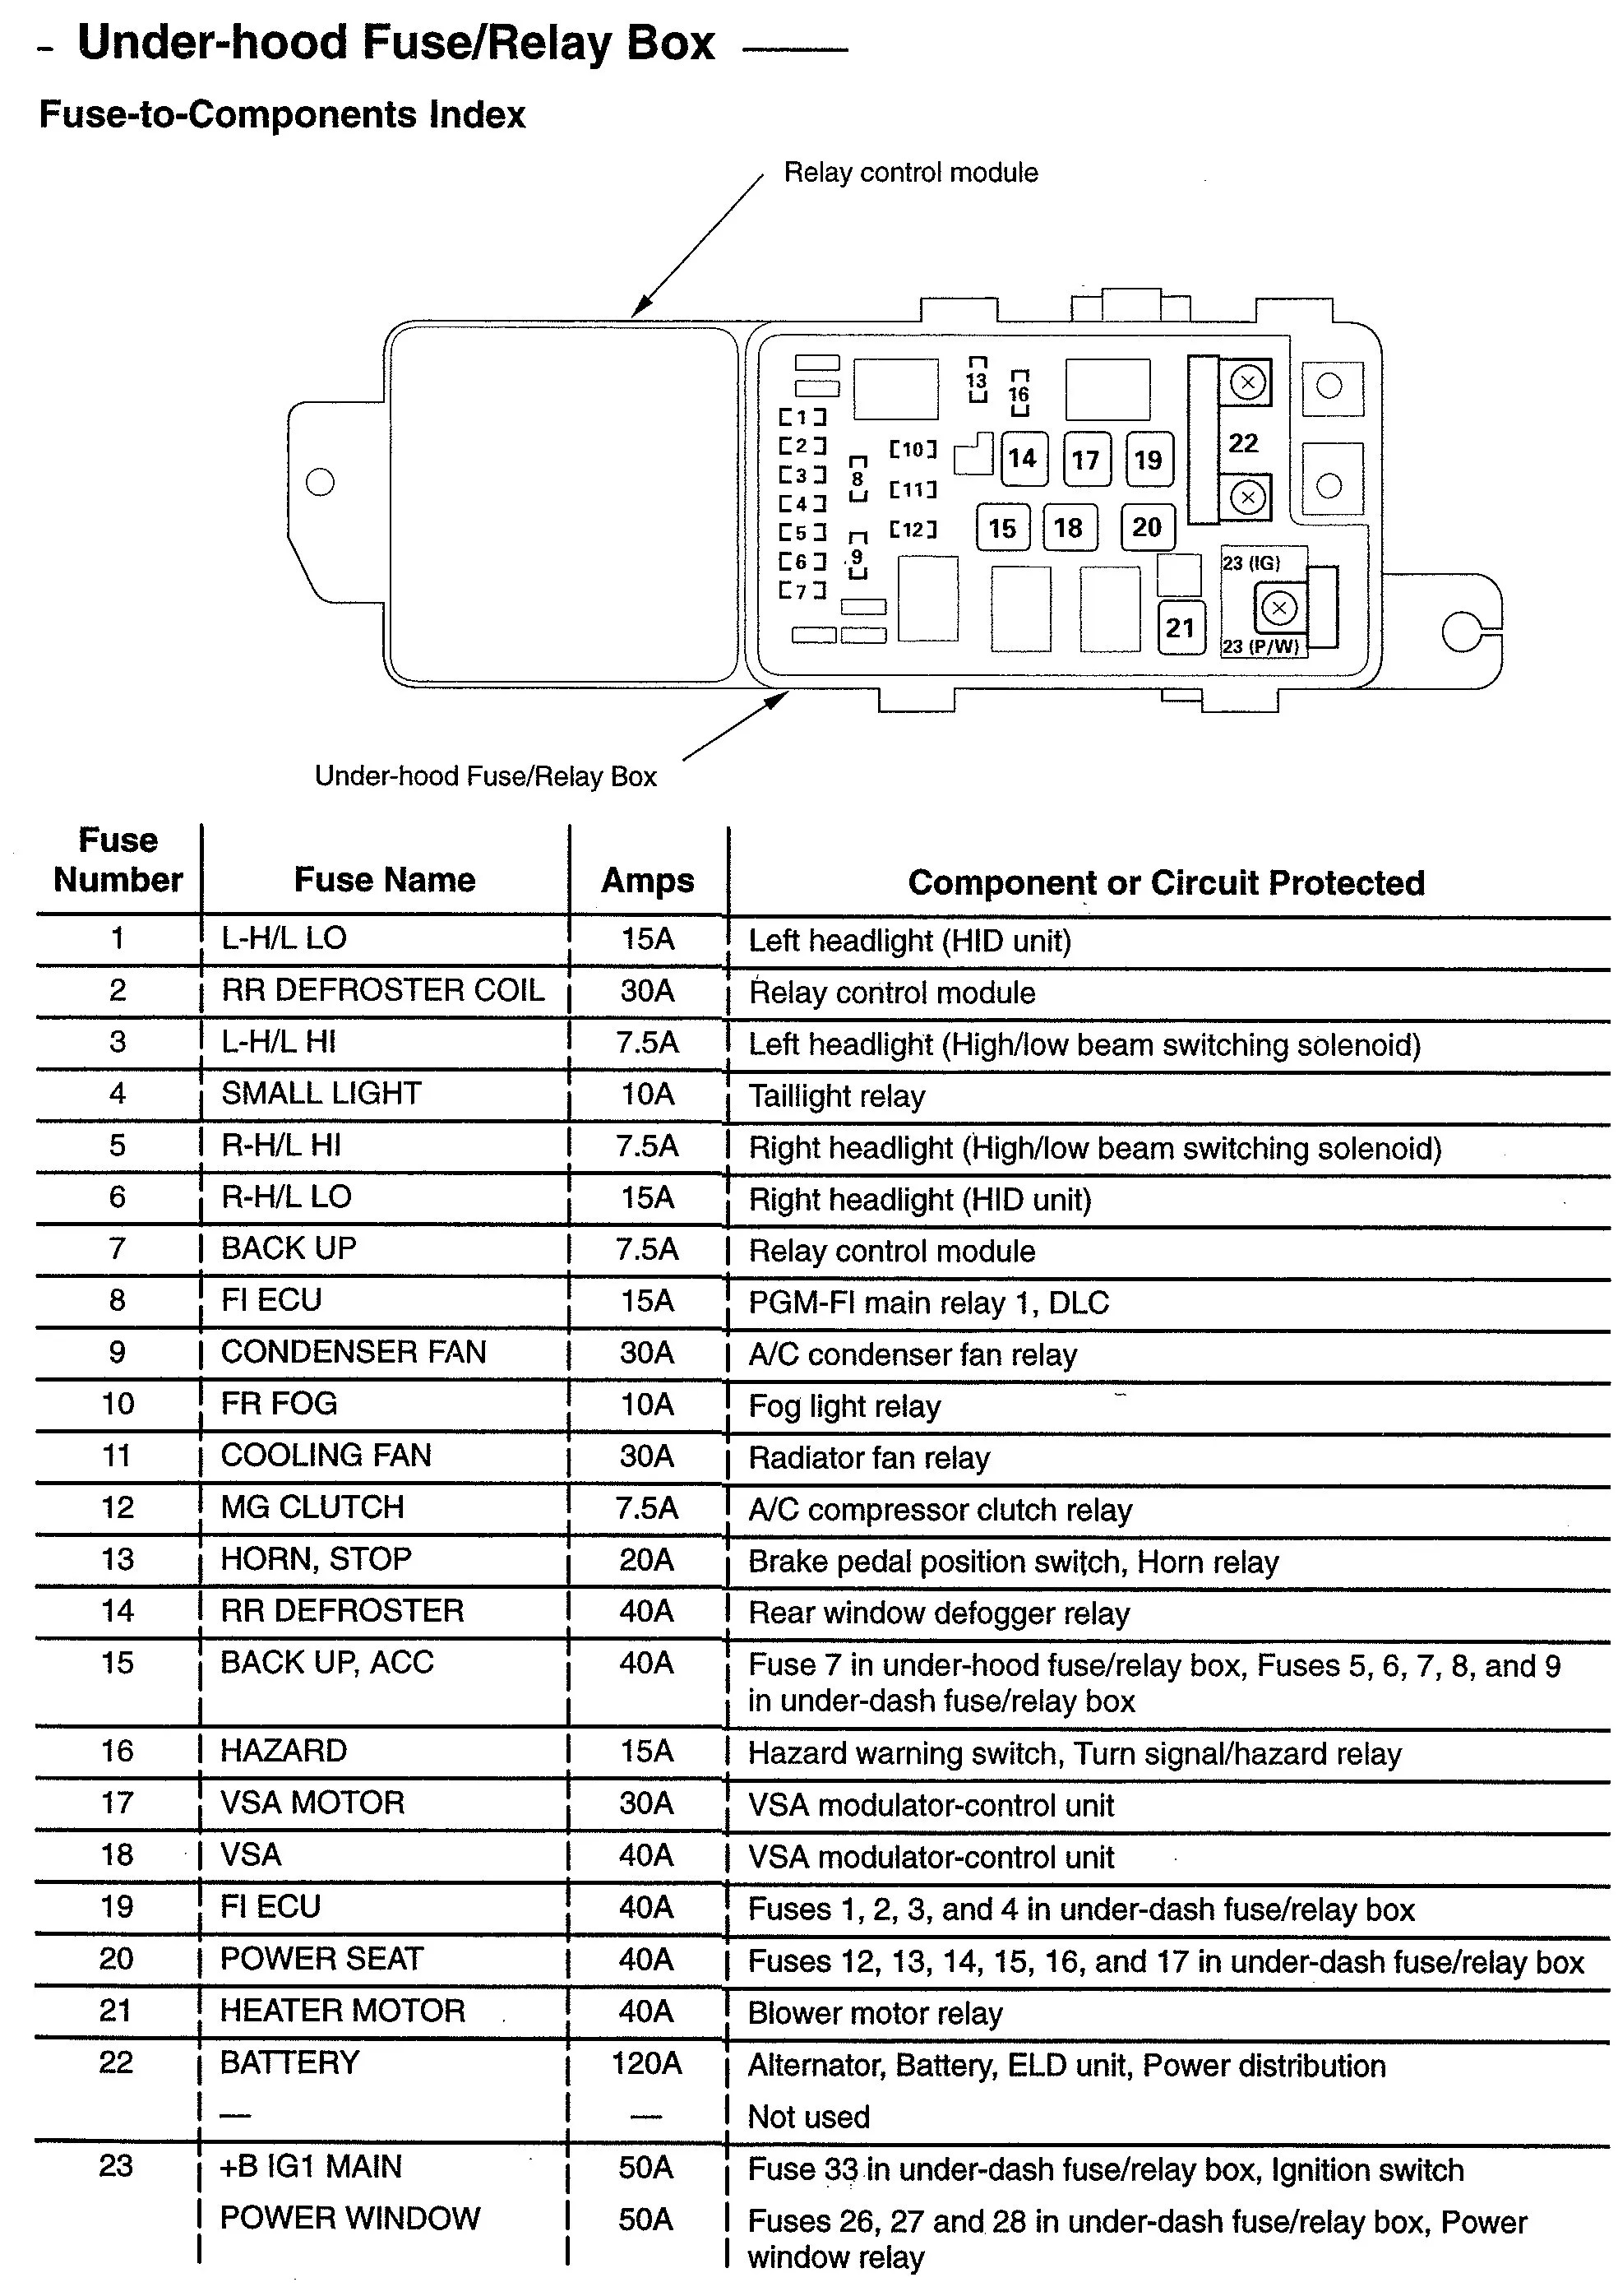 98 Acura Fuse Box - Wiring Diagram Networks